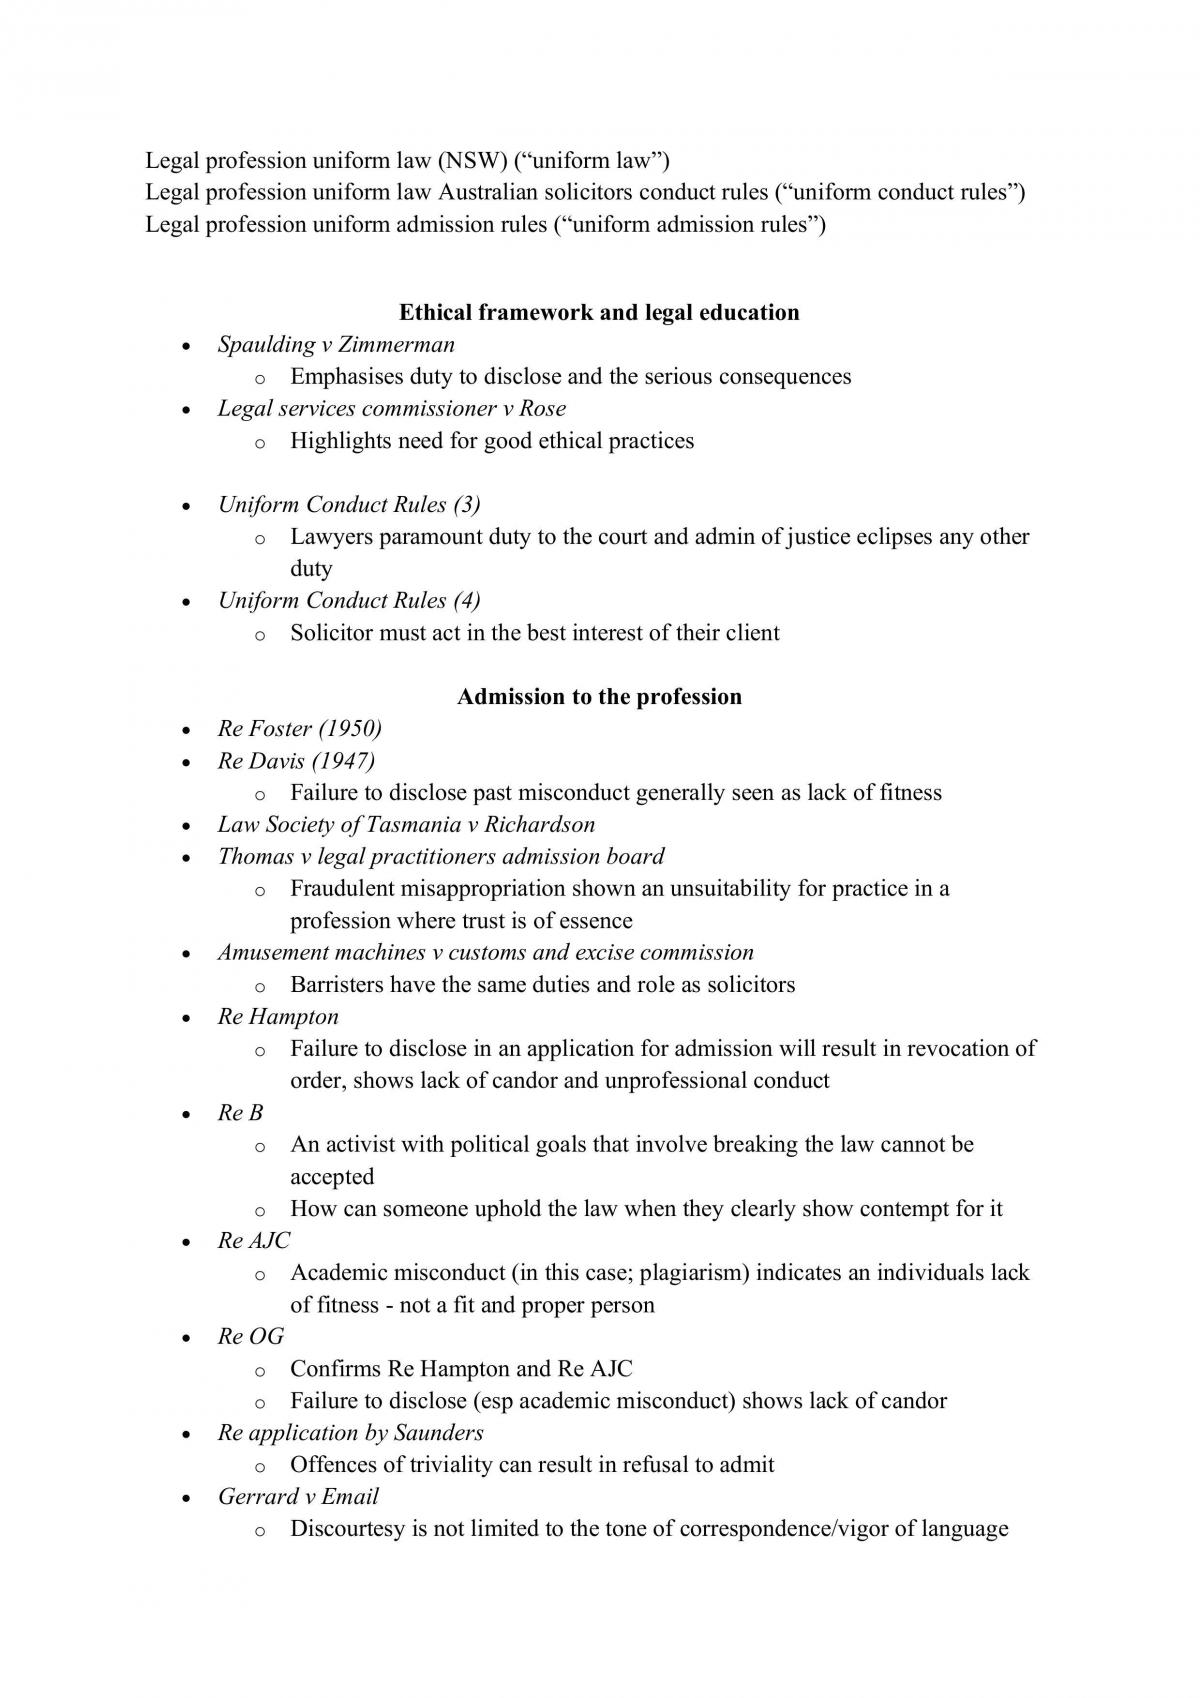 LLB1197 Full Exam Notes - Page 2